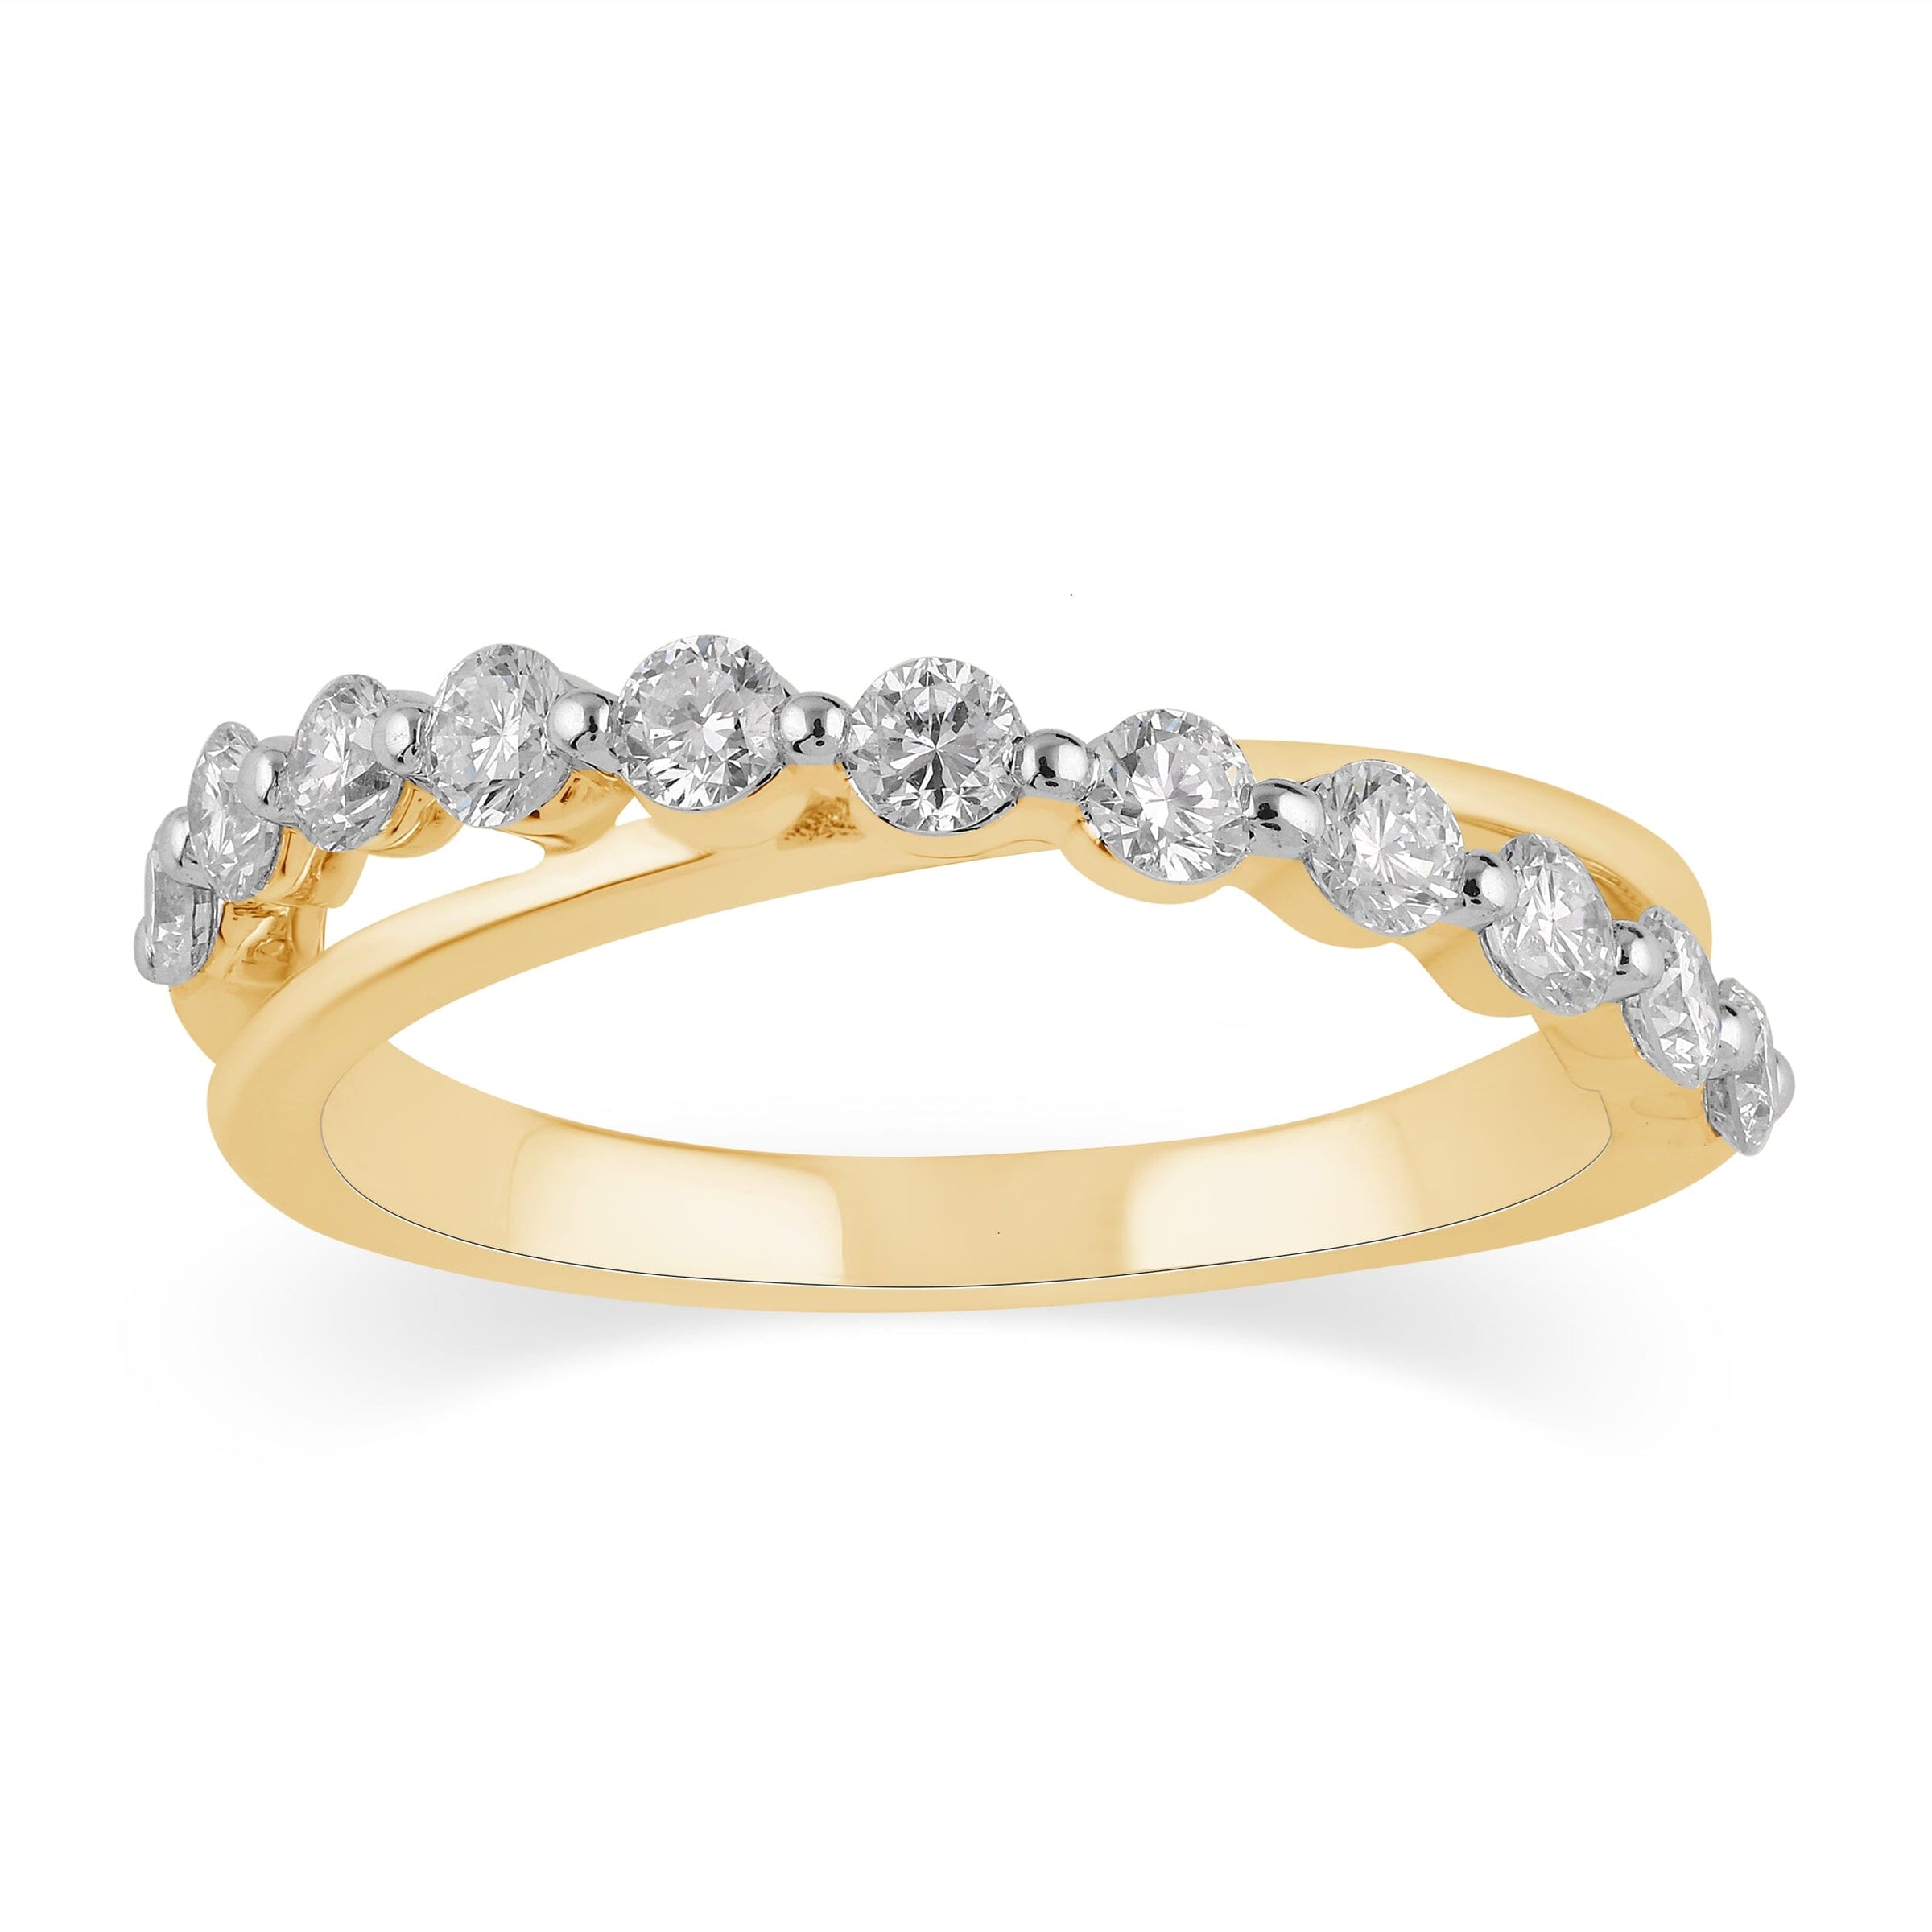 Meera Alternating Bead Crossover Ring with 1/2ct of Laboratory Grown Diamonds in 9ct Yellow Gold Rings Bevilles 